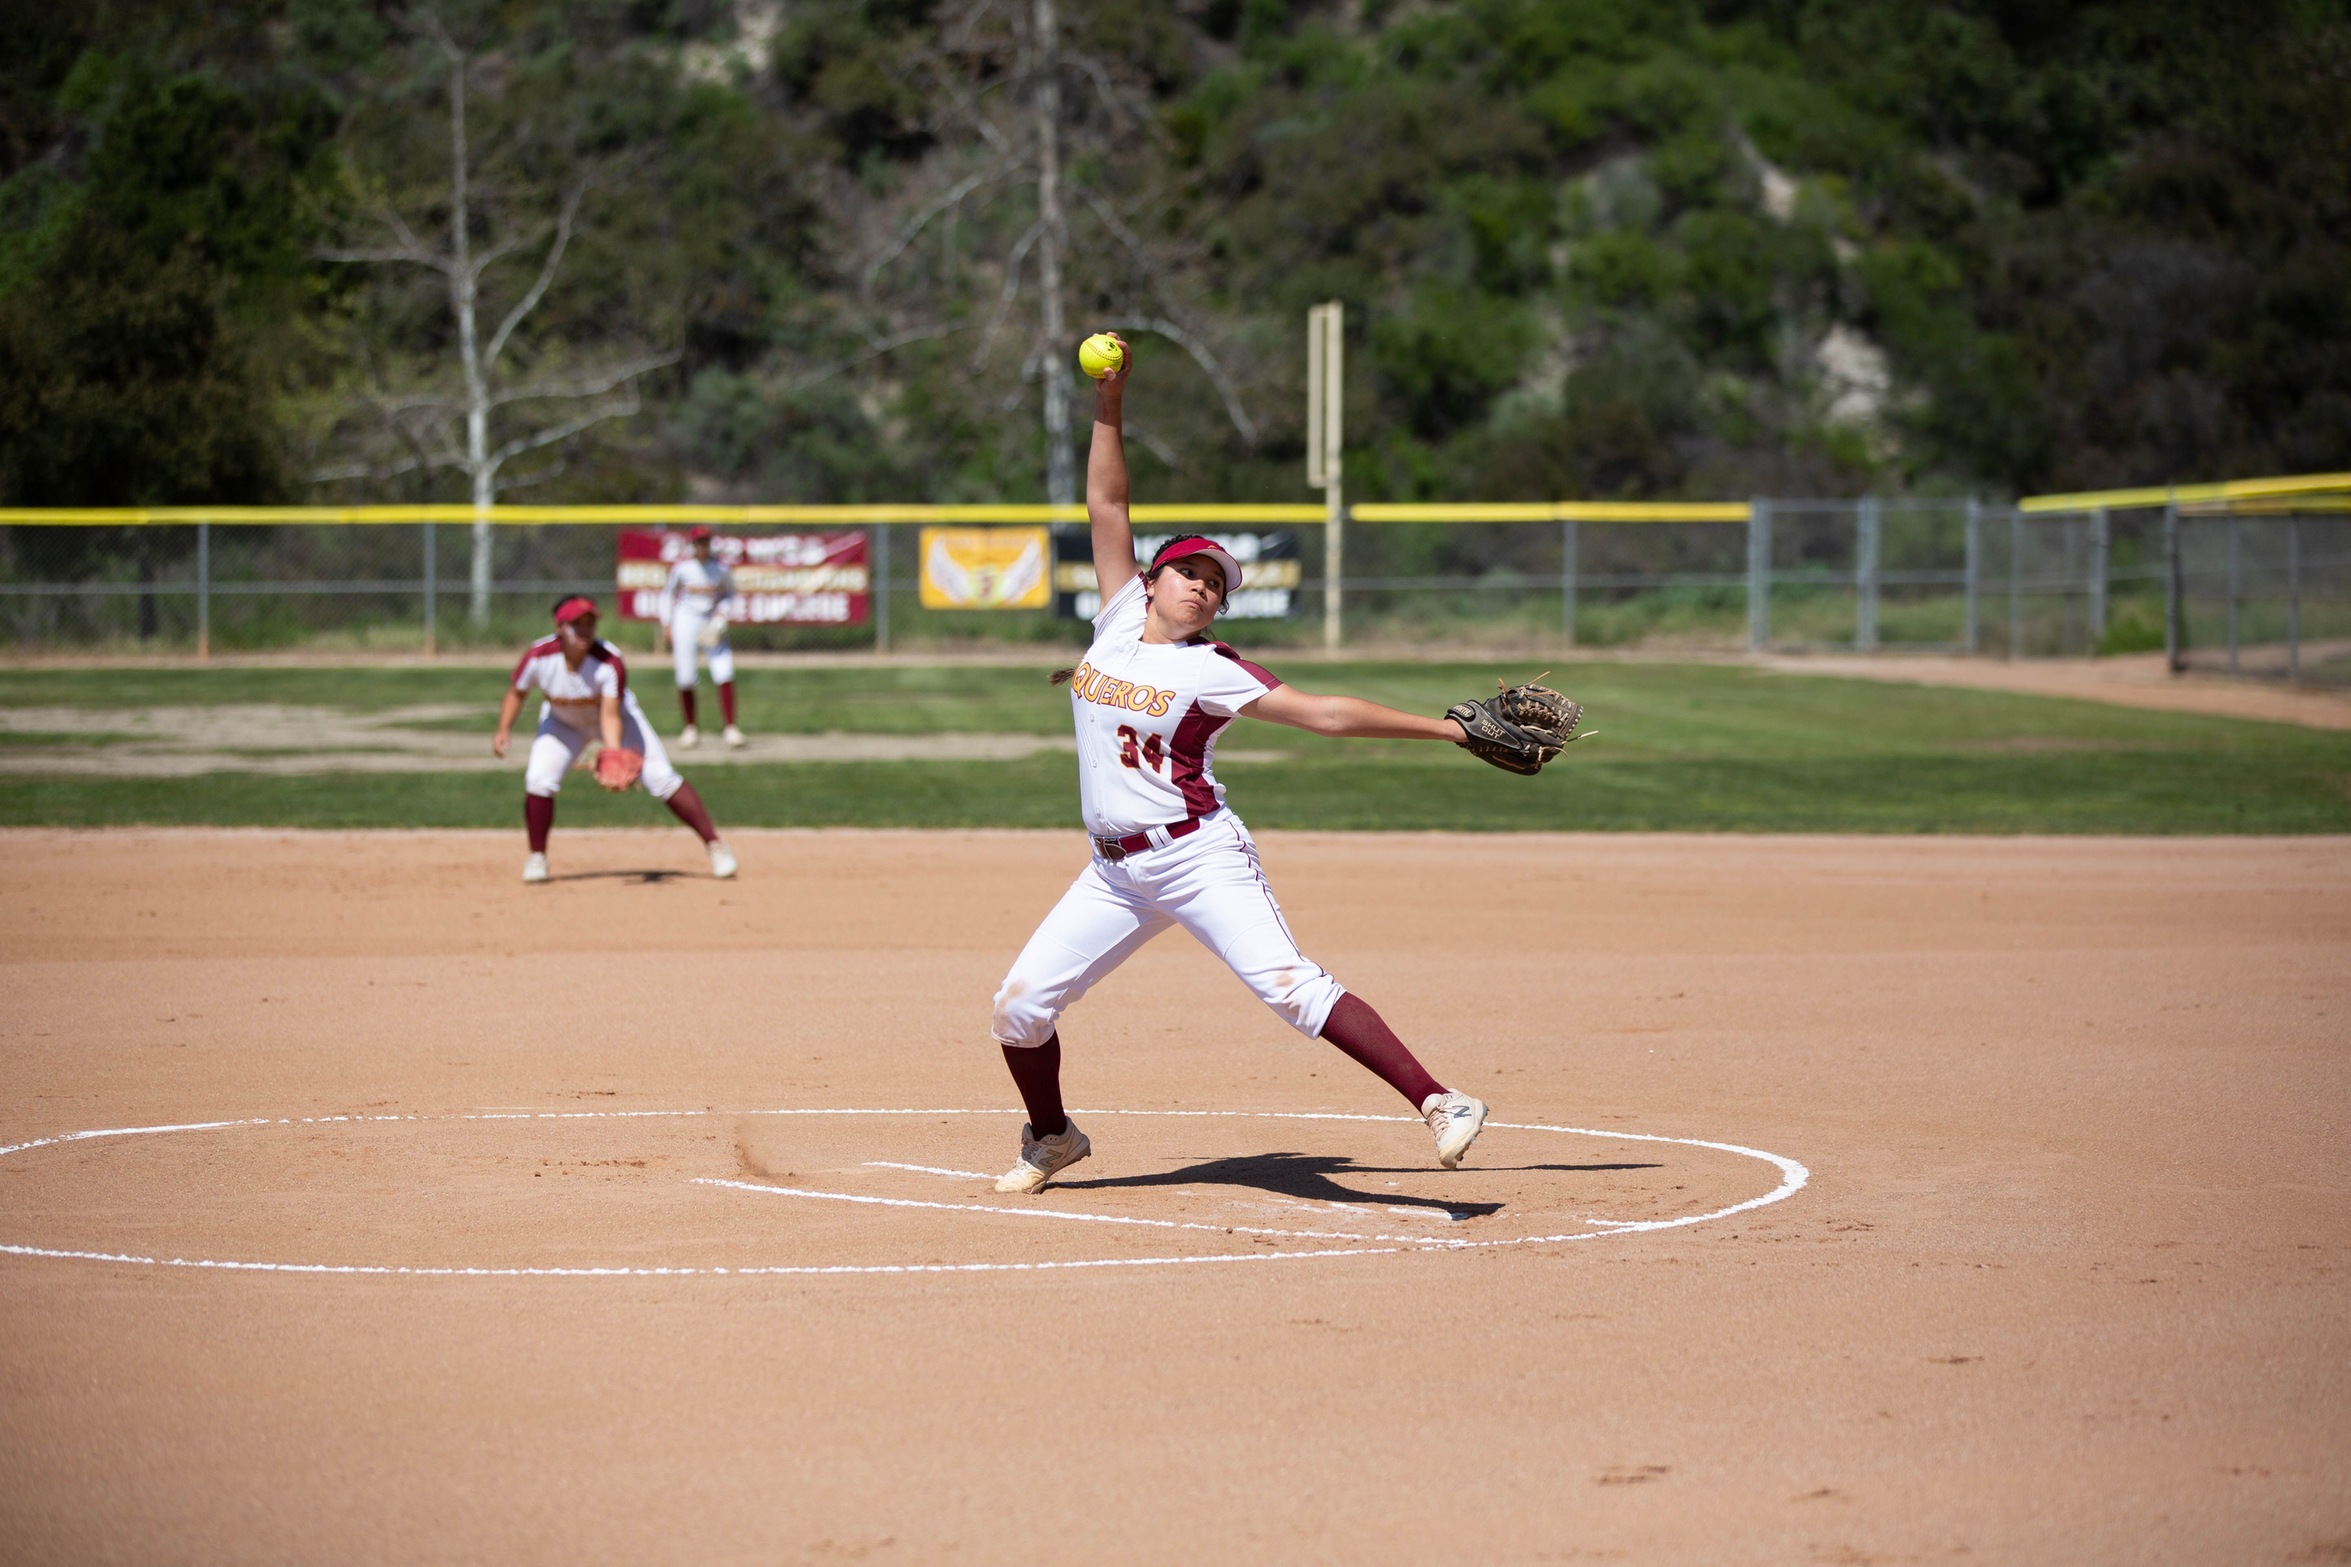 GCC Softball beats L.A. Valley 4-2 March 27 in WSC East Conference victory